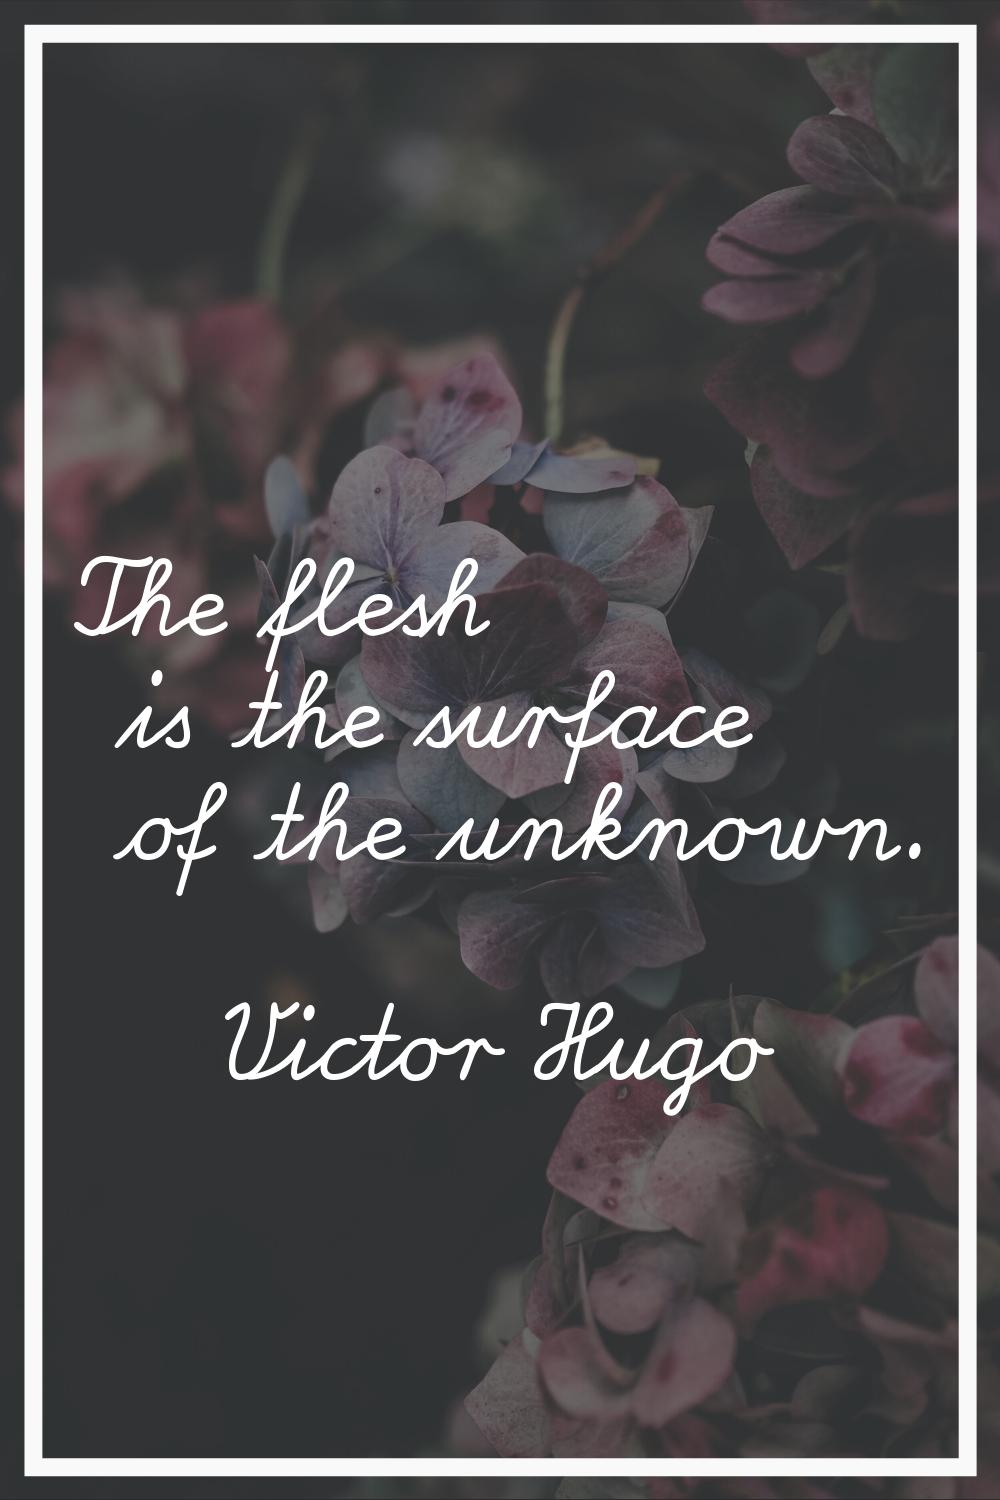 The flesh is the surface of the unknown.